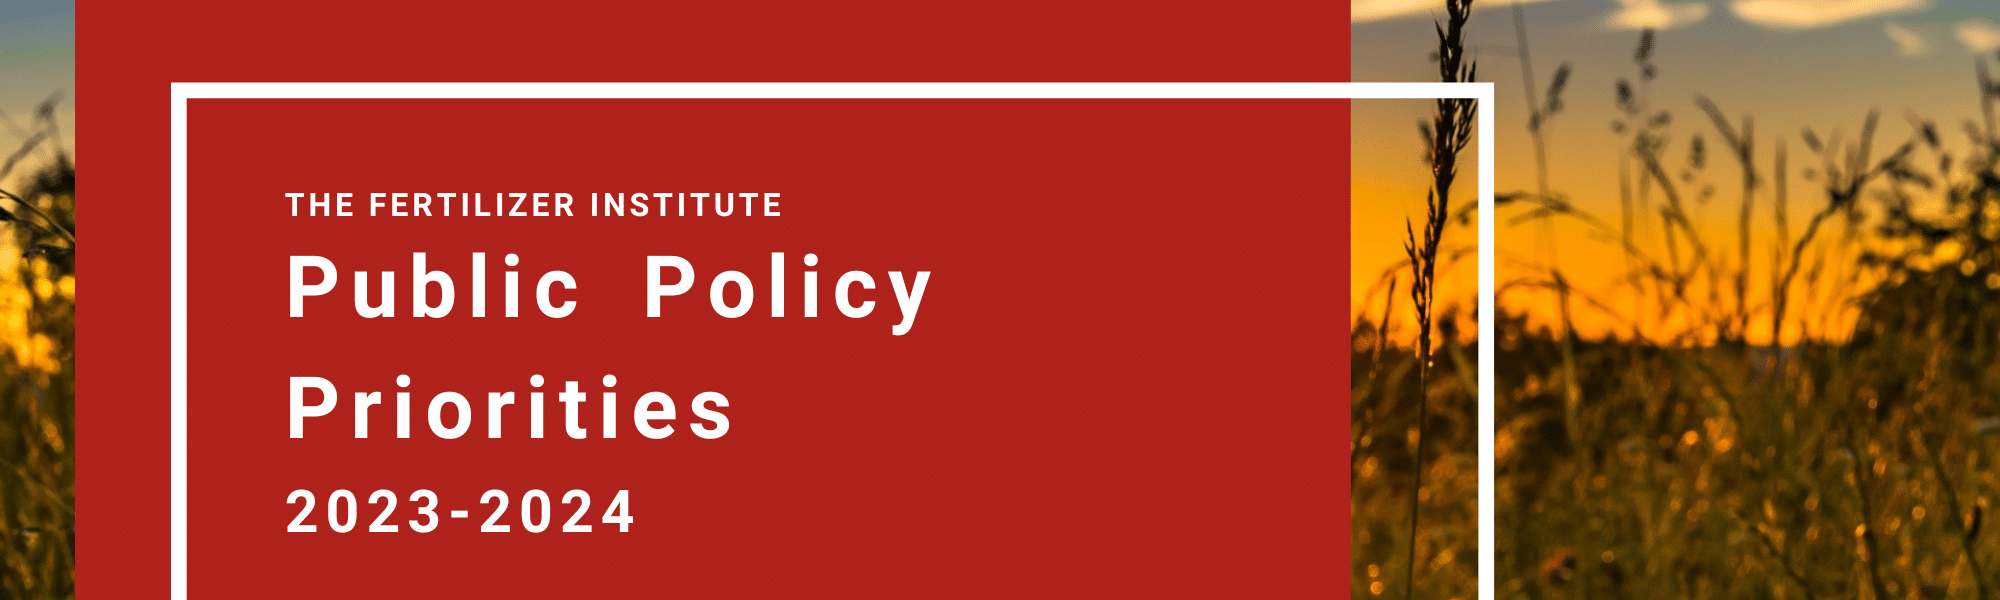 Public Policy Priorities 2023-2024